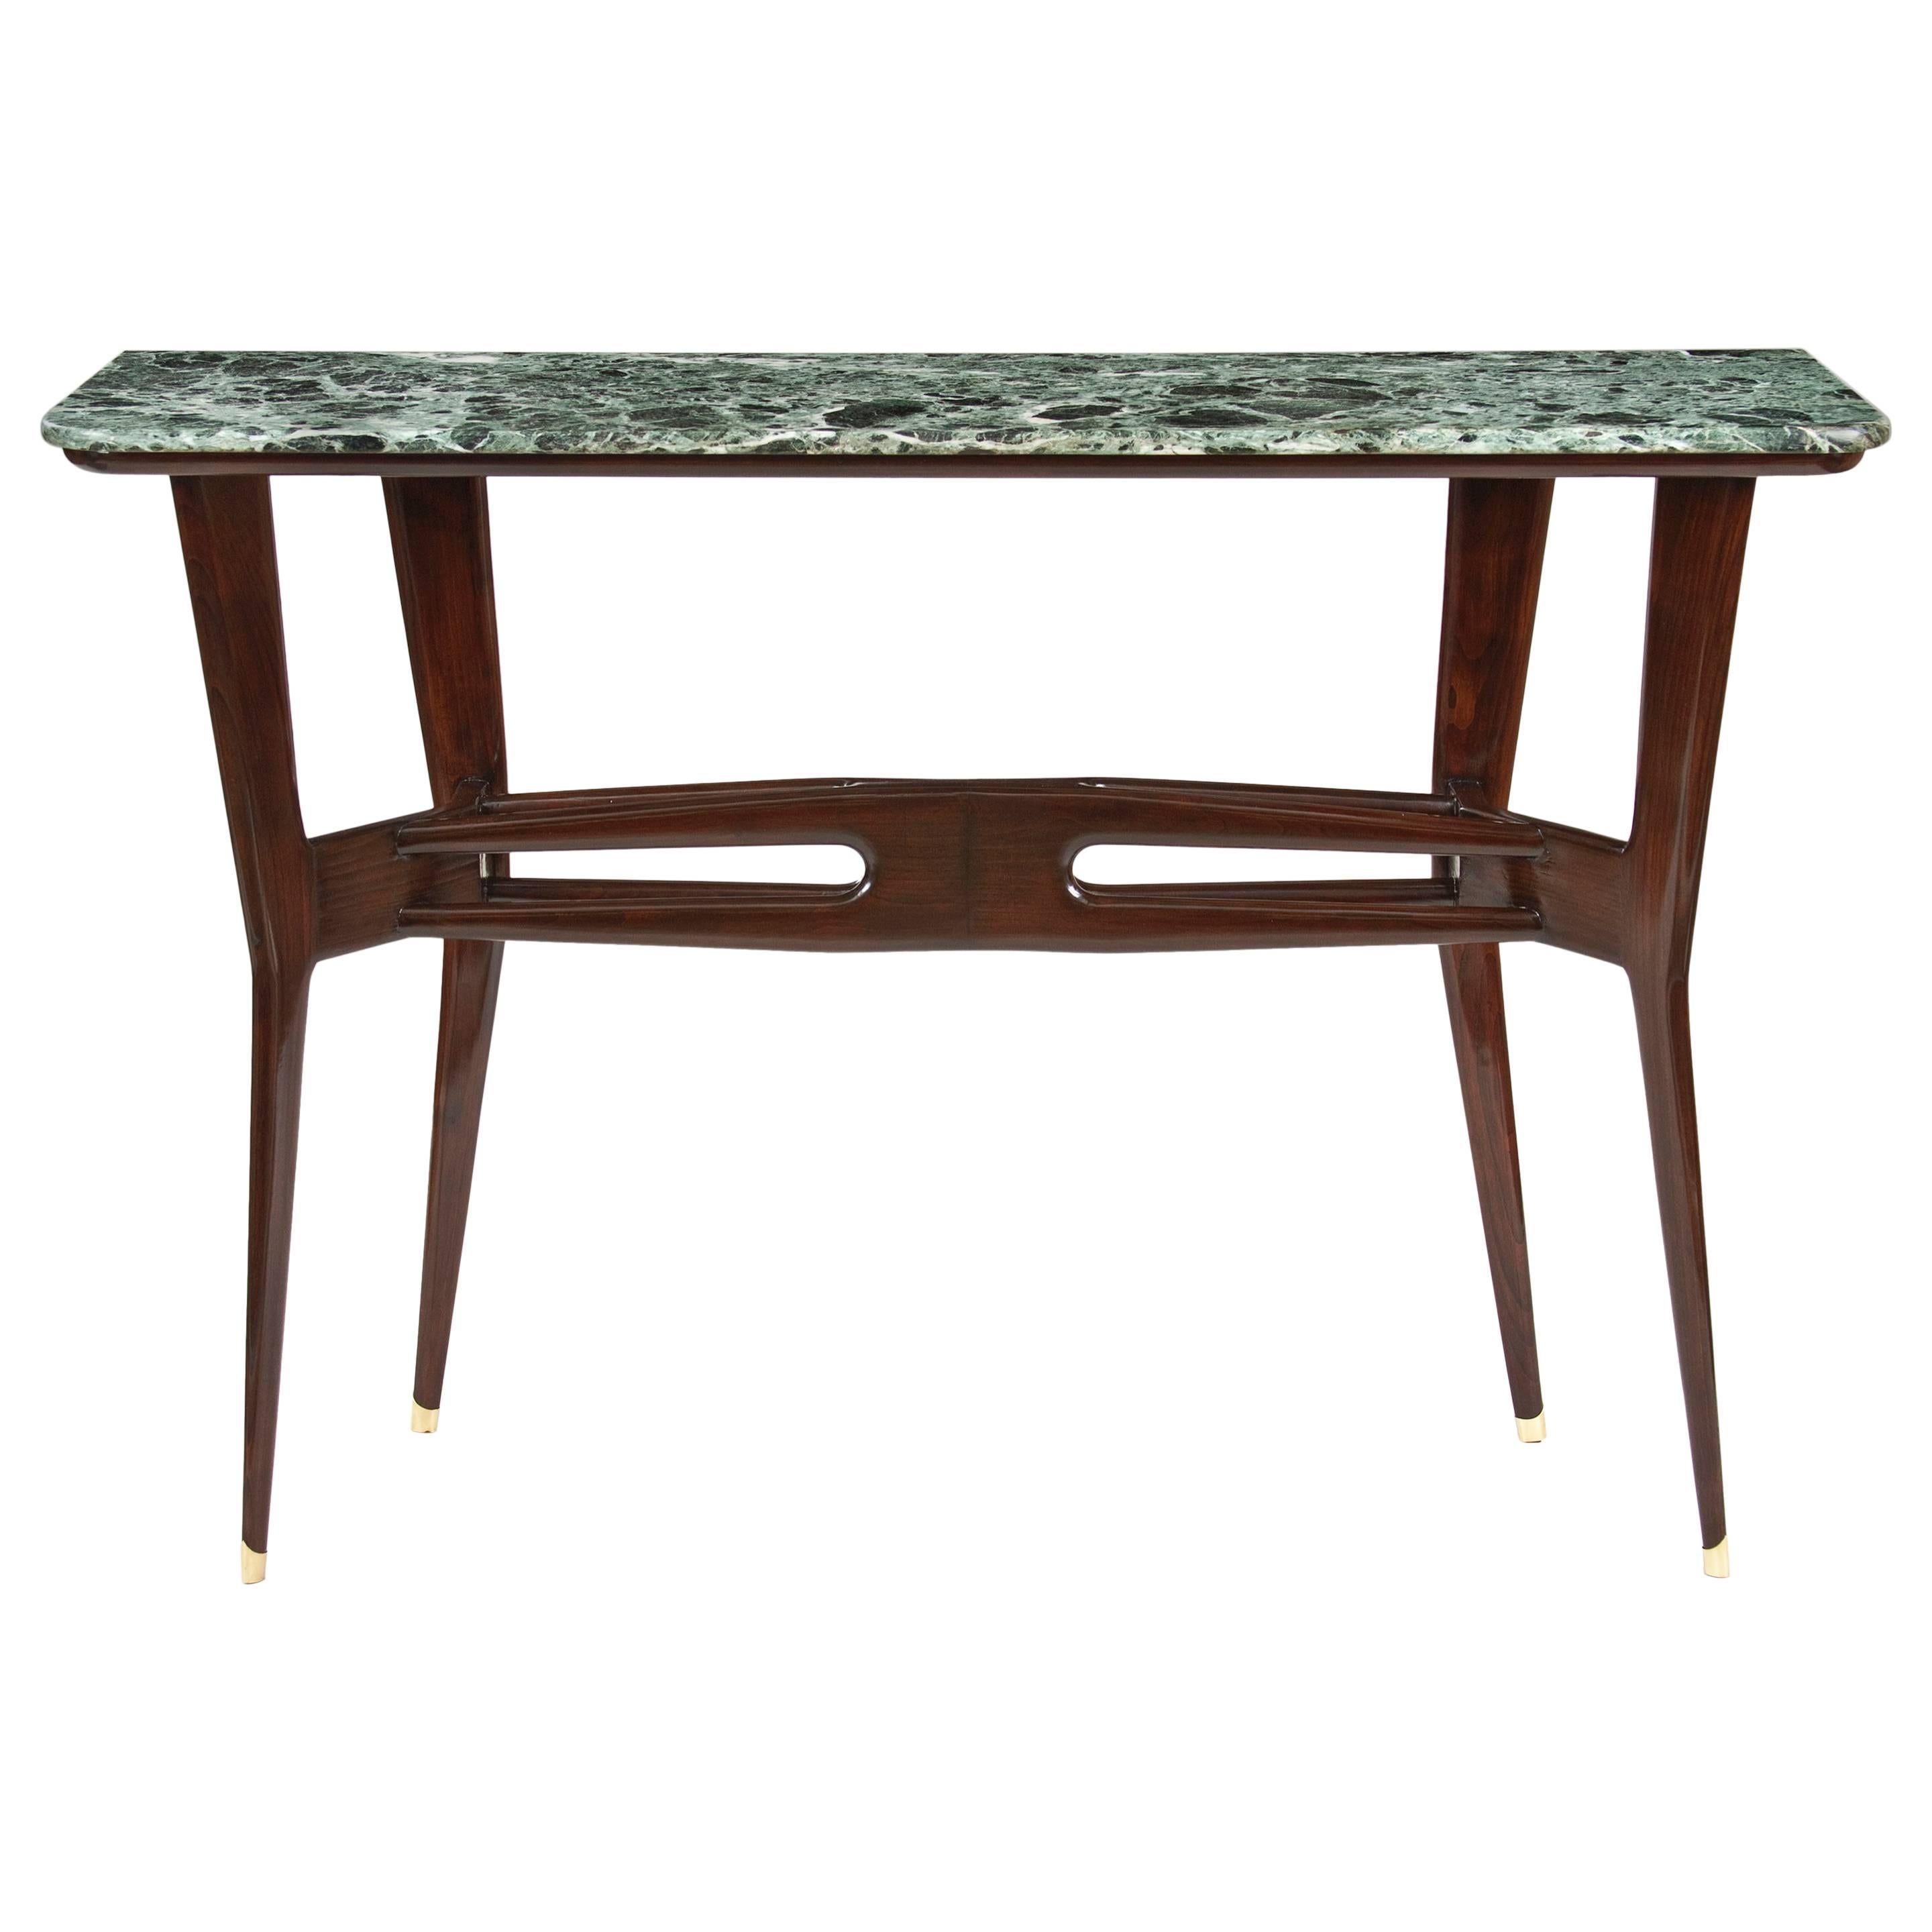 Italian Ebonzed Wood and Marble Topped Console Table, Mid 20th Century